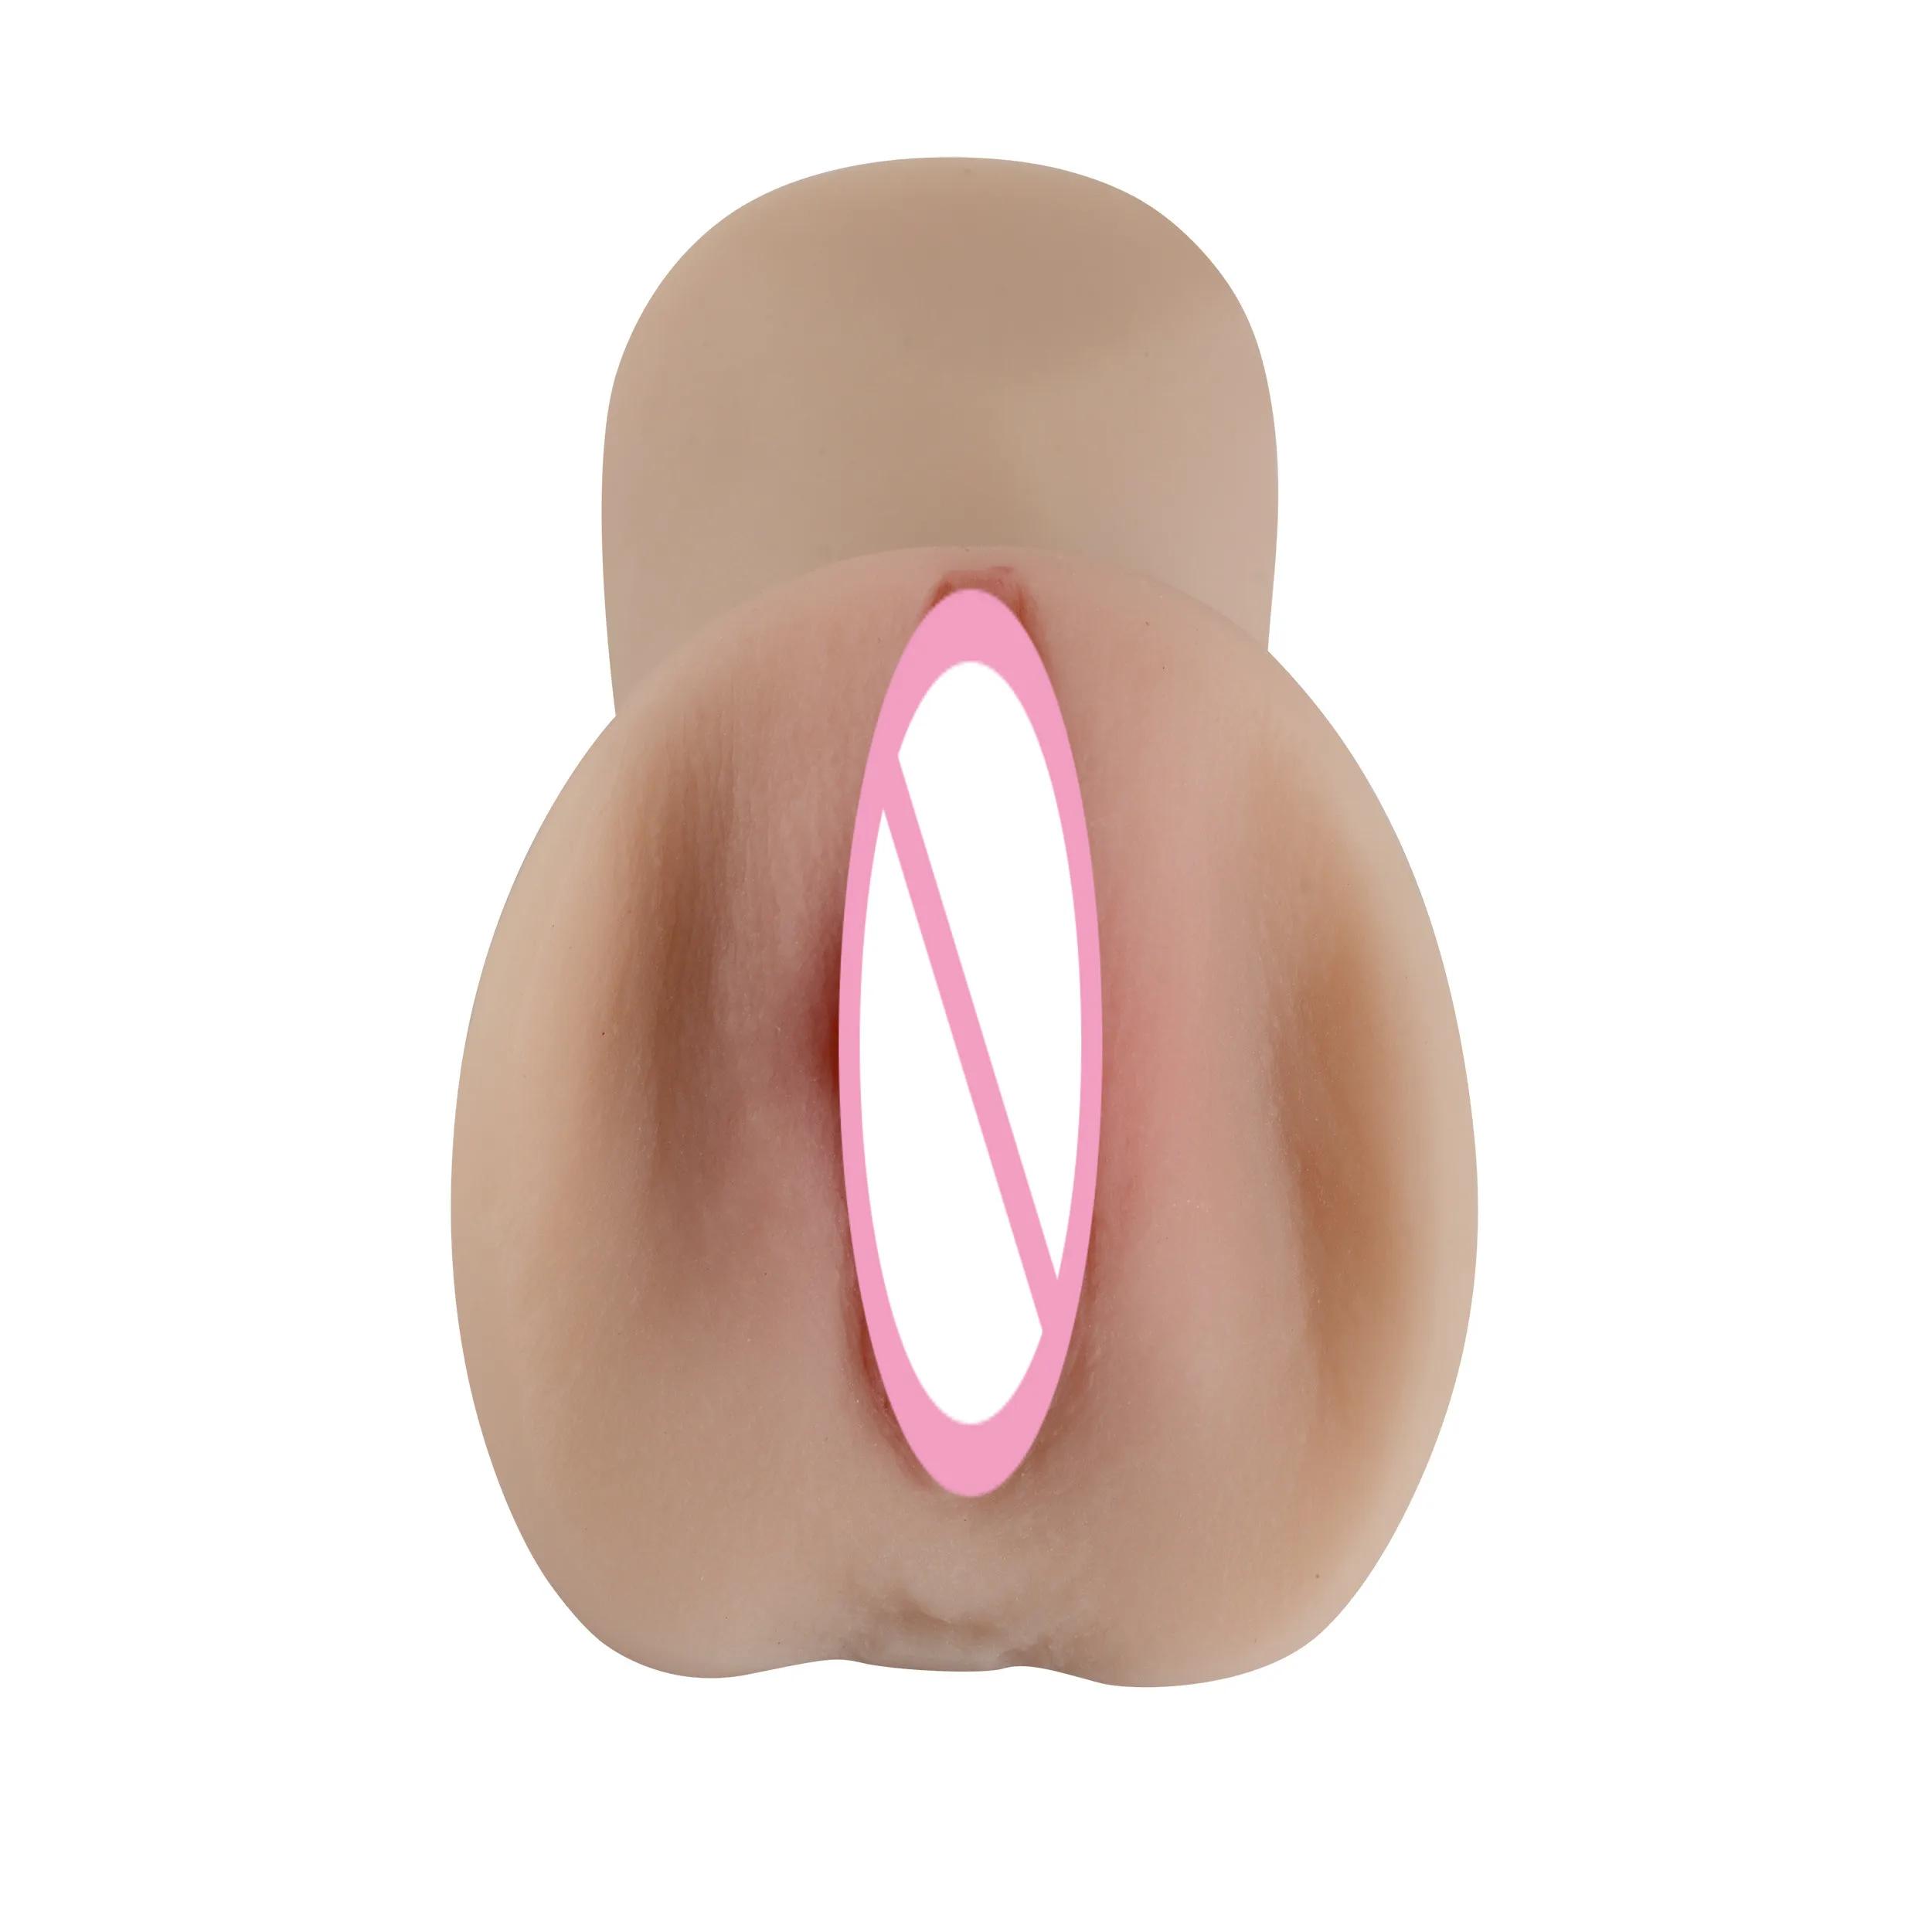 Xise Miriam Vagina Real Pussy Adult Sex Toy Massage Toy For Male  Masturbator Sensuality Artificial Pocket Pussy Stroker For Men - Buy Real  Touch Sexy Male Masturbation Toys,Japanese Male Masturbator Vagina Toy,Adult